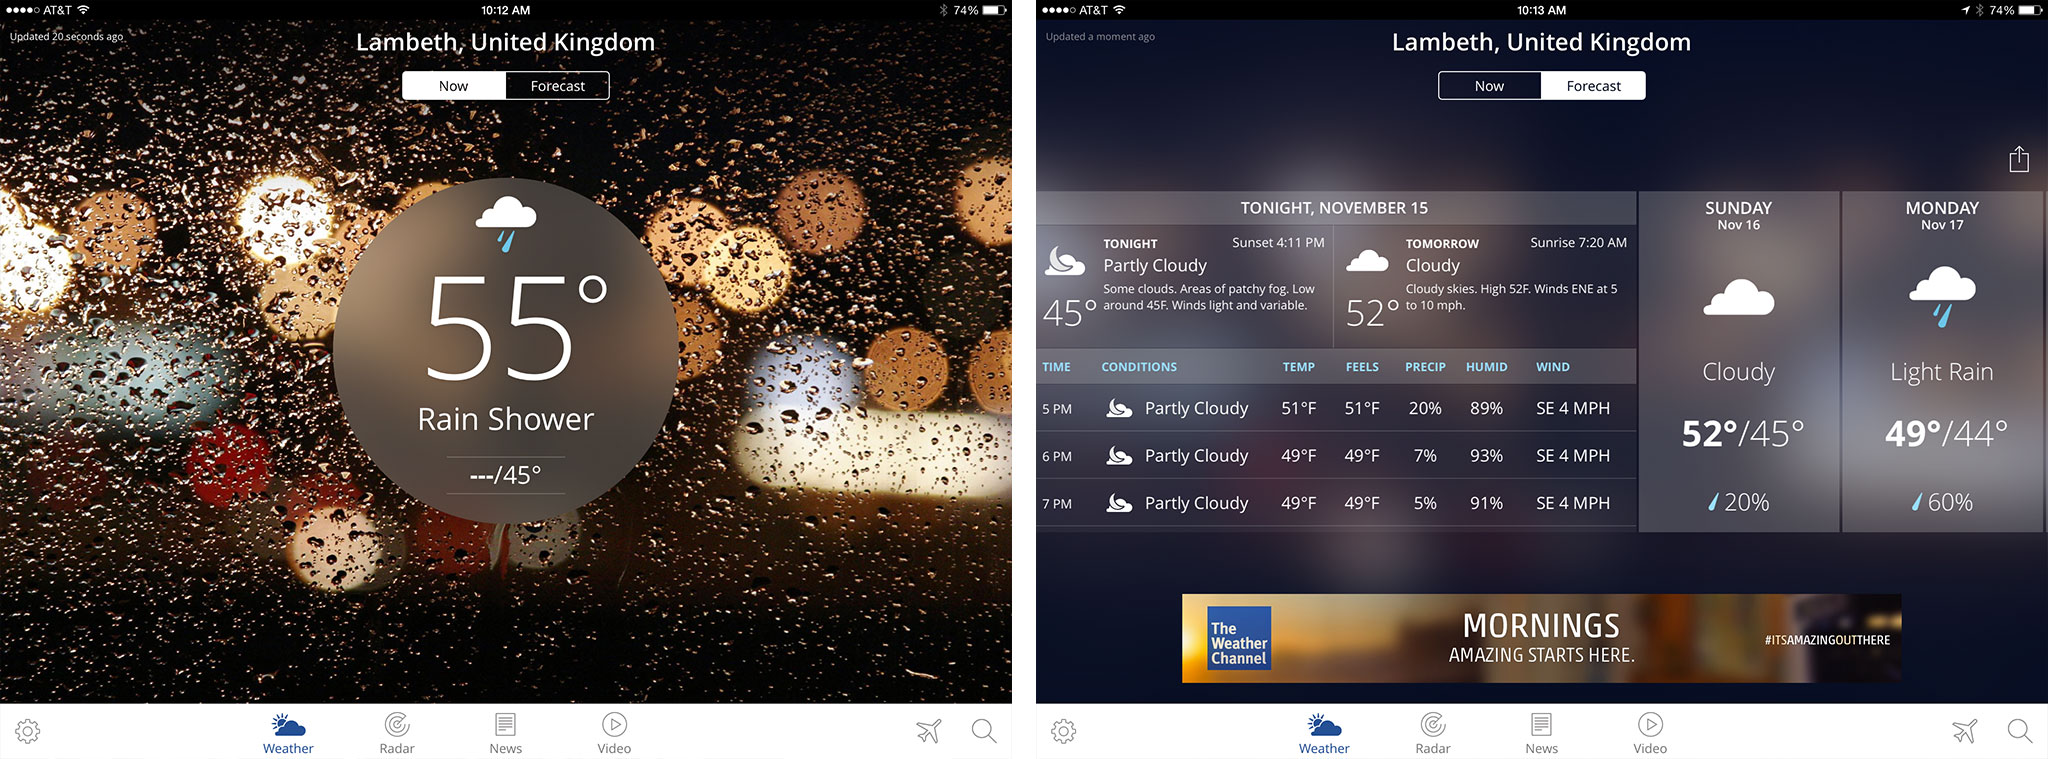 https://www.imore.com/sites/imore.com/files/styles/larger/public/field/image/2014/11/weather_channel_ipad_air_best_apps_screens.jpg?itok=fFs8cltO